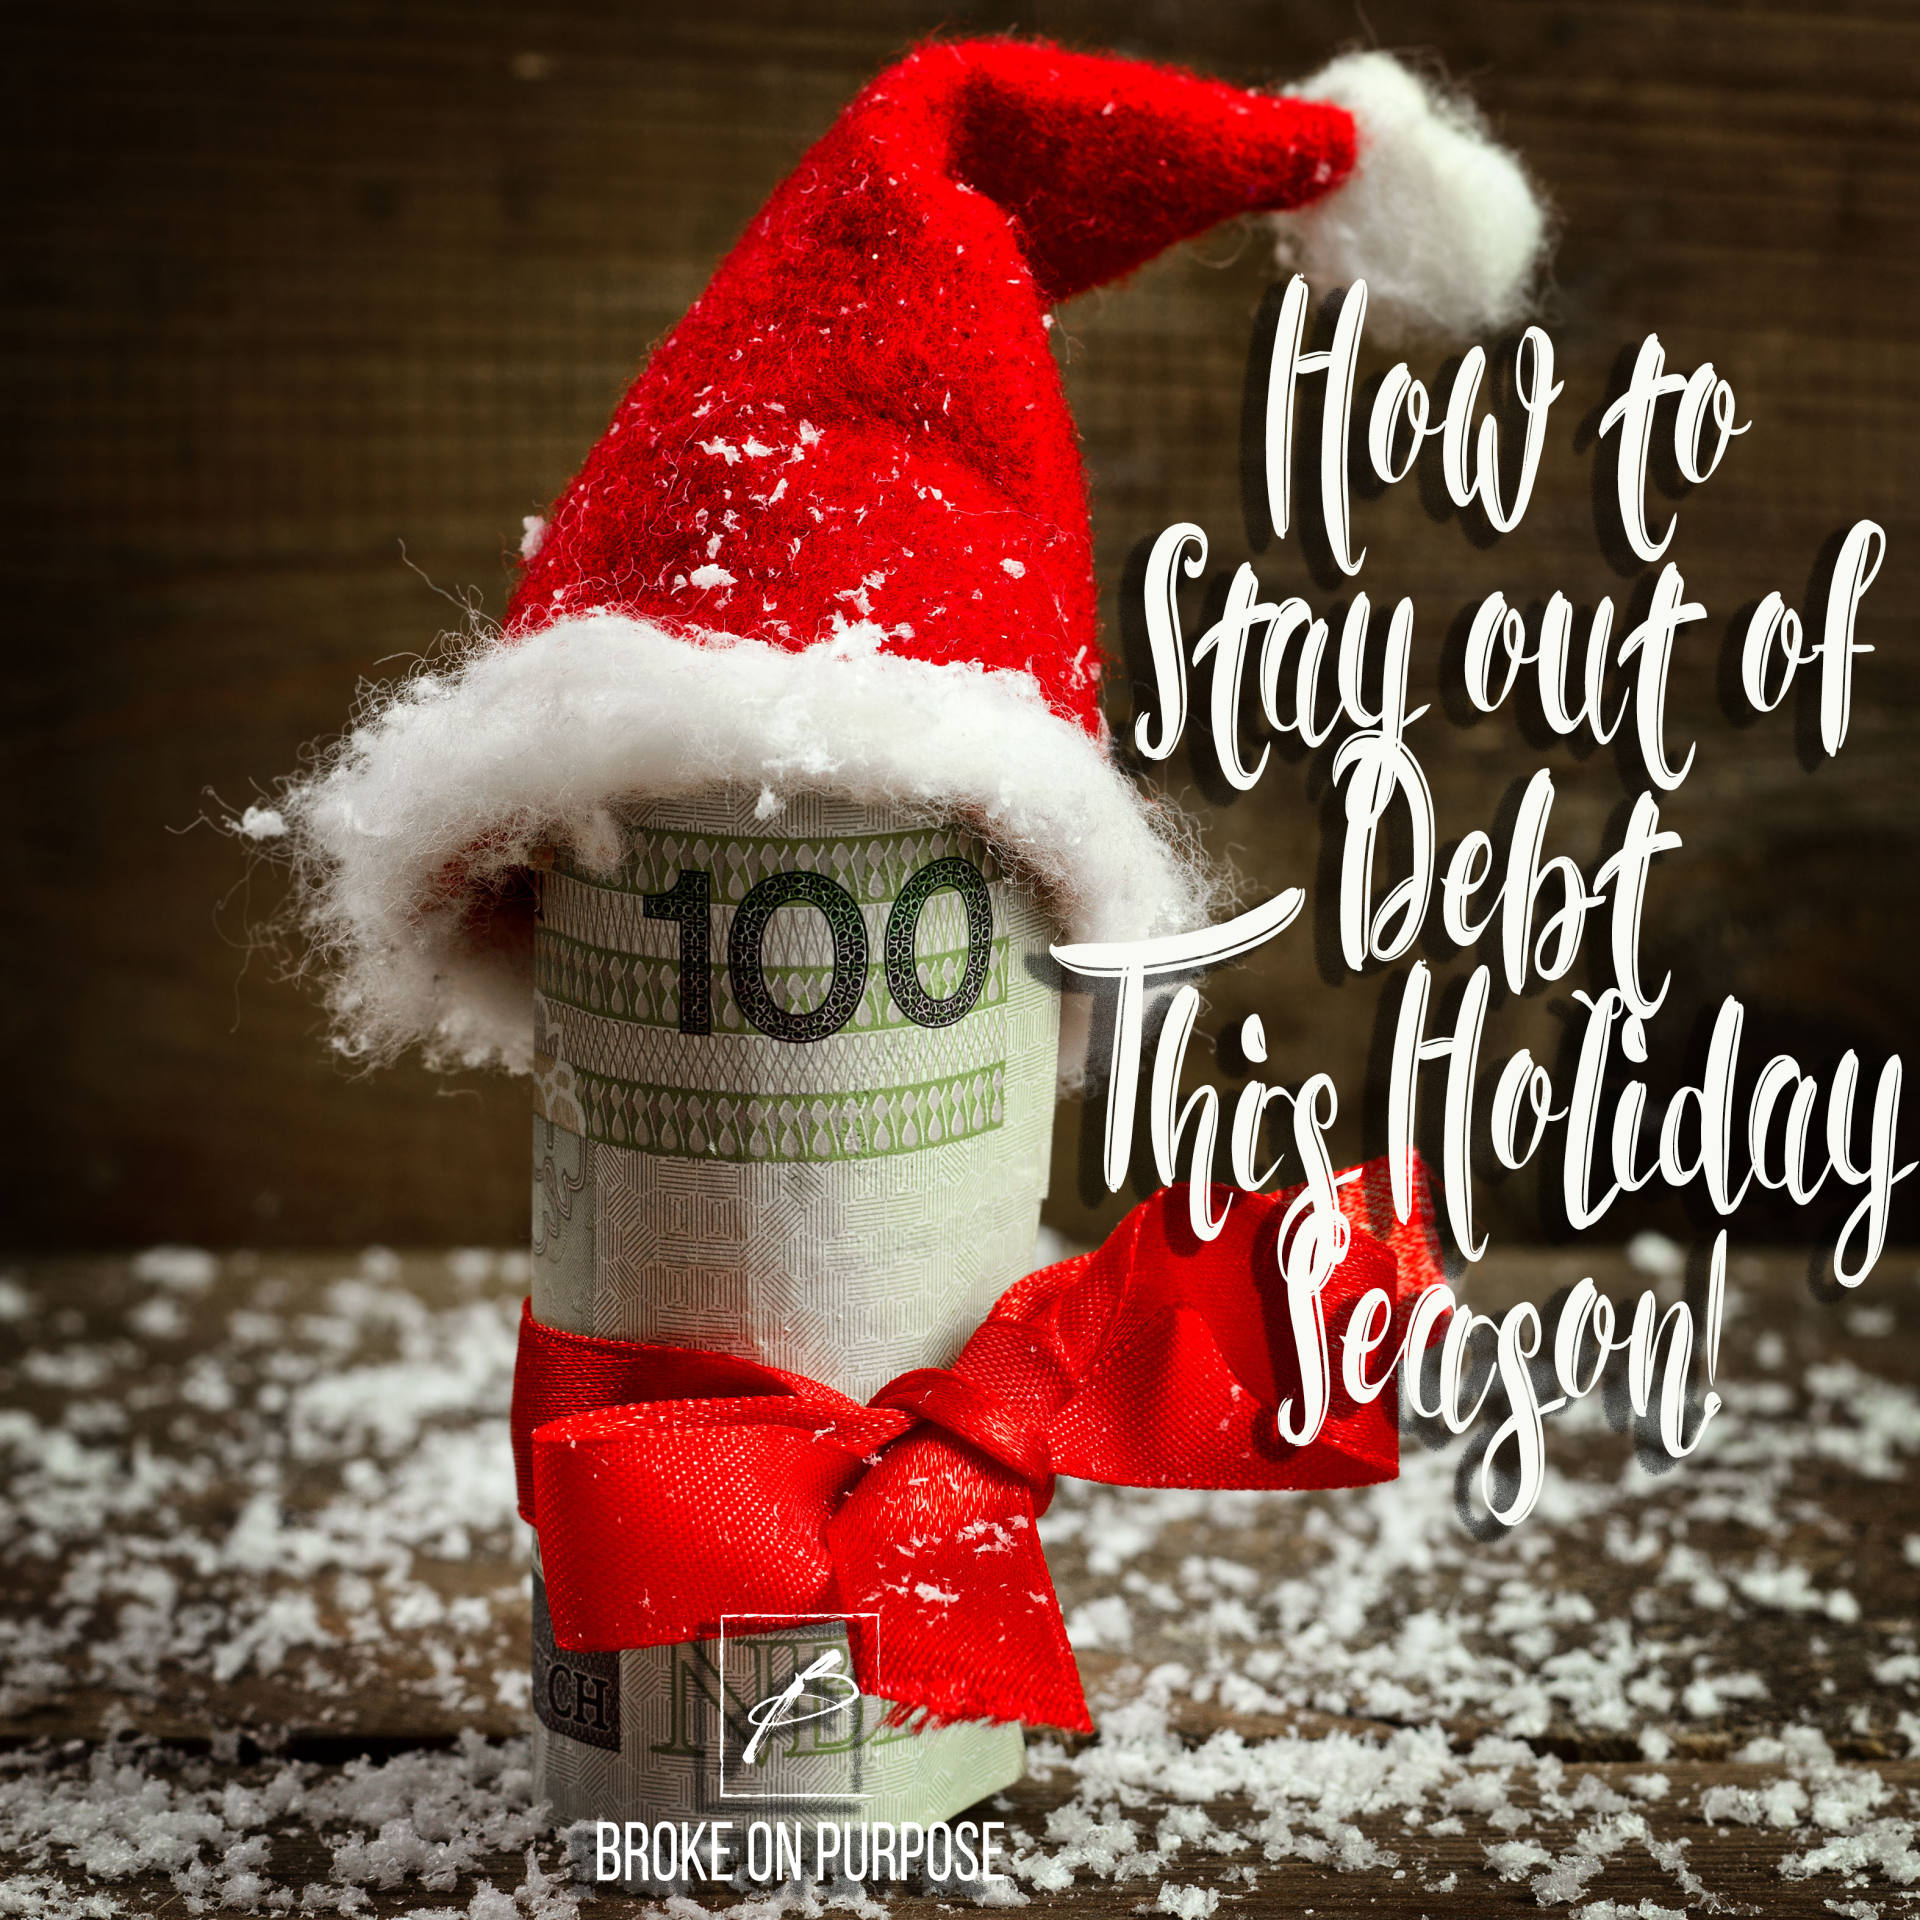 How to Stay out of debt this holiday season. |www.beingmelody.com| Broke on Purpose| @BeingMelody